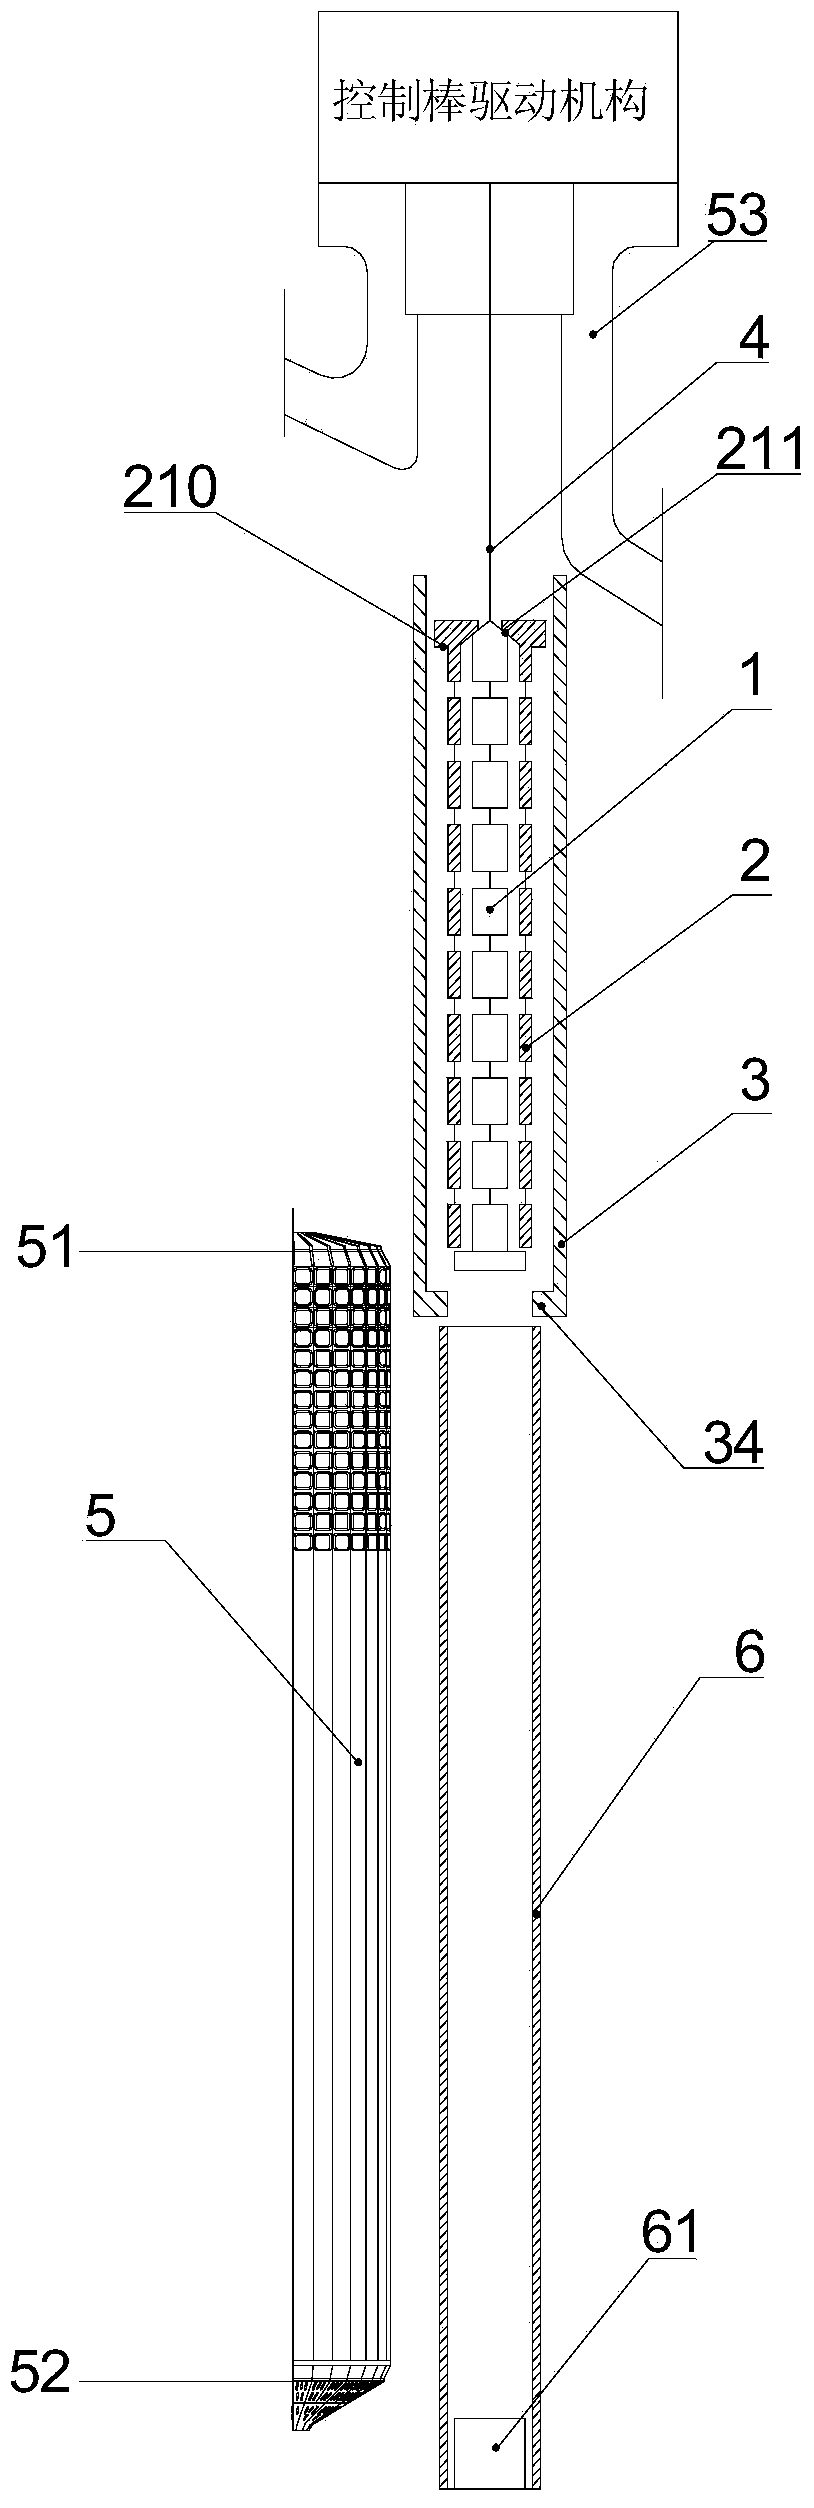 Reactivity control method of pebble-bed high-temperature gas cooled reactor and telescopiform control rod